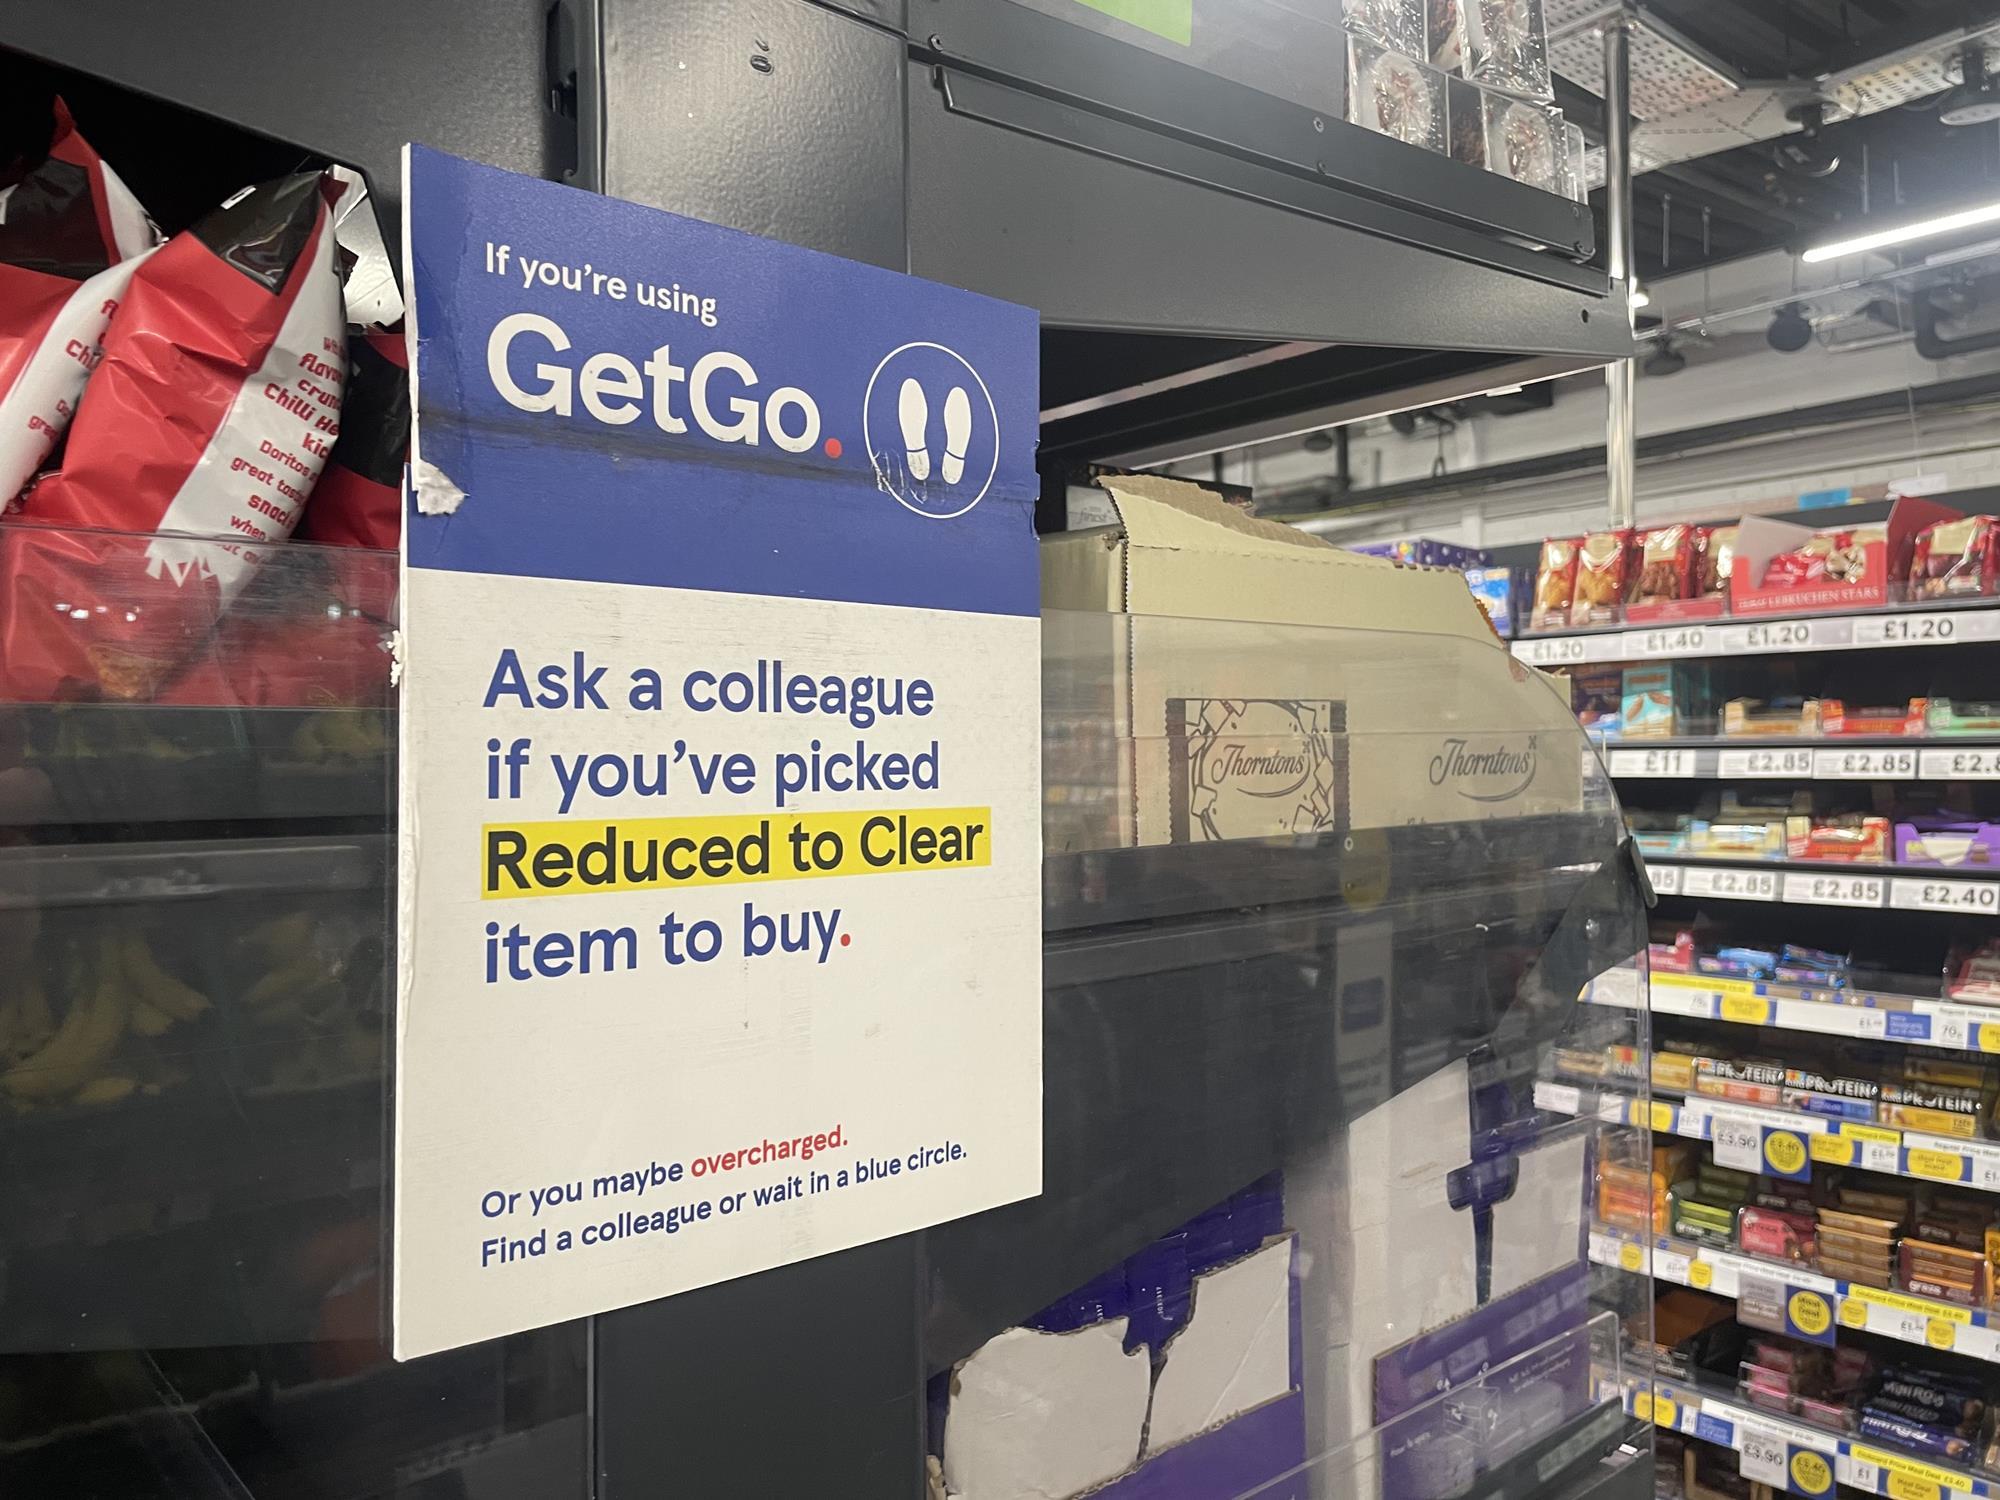 Tesco warns GetGo shoppers they may be overcharged for discounted items, News